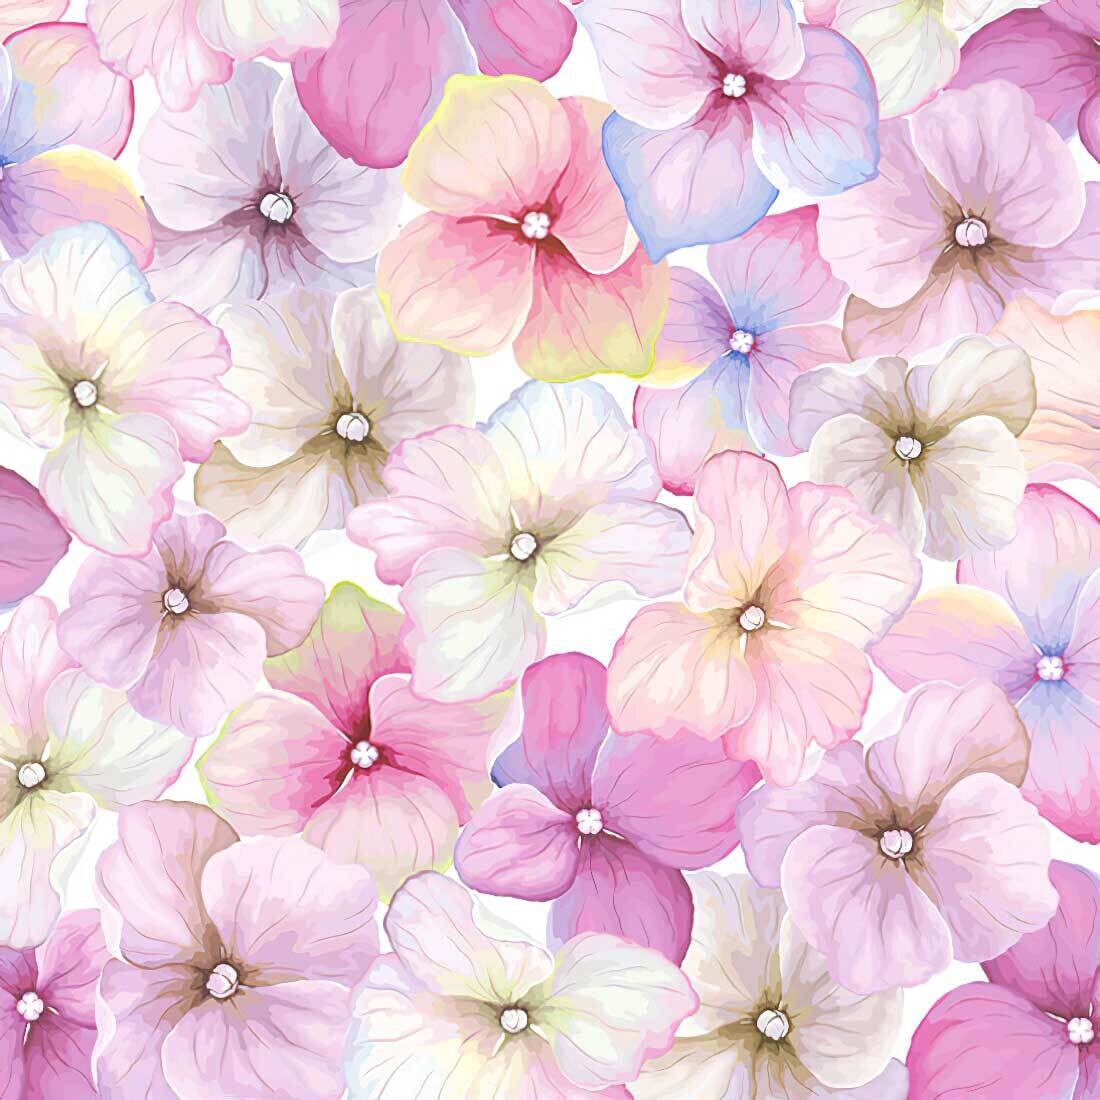 Decoupage Paper Napkins - Floral - Pink Hydrangea Pattern (1 Sheet) Out of Stock